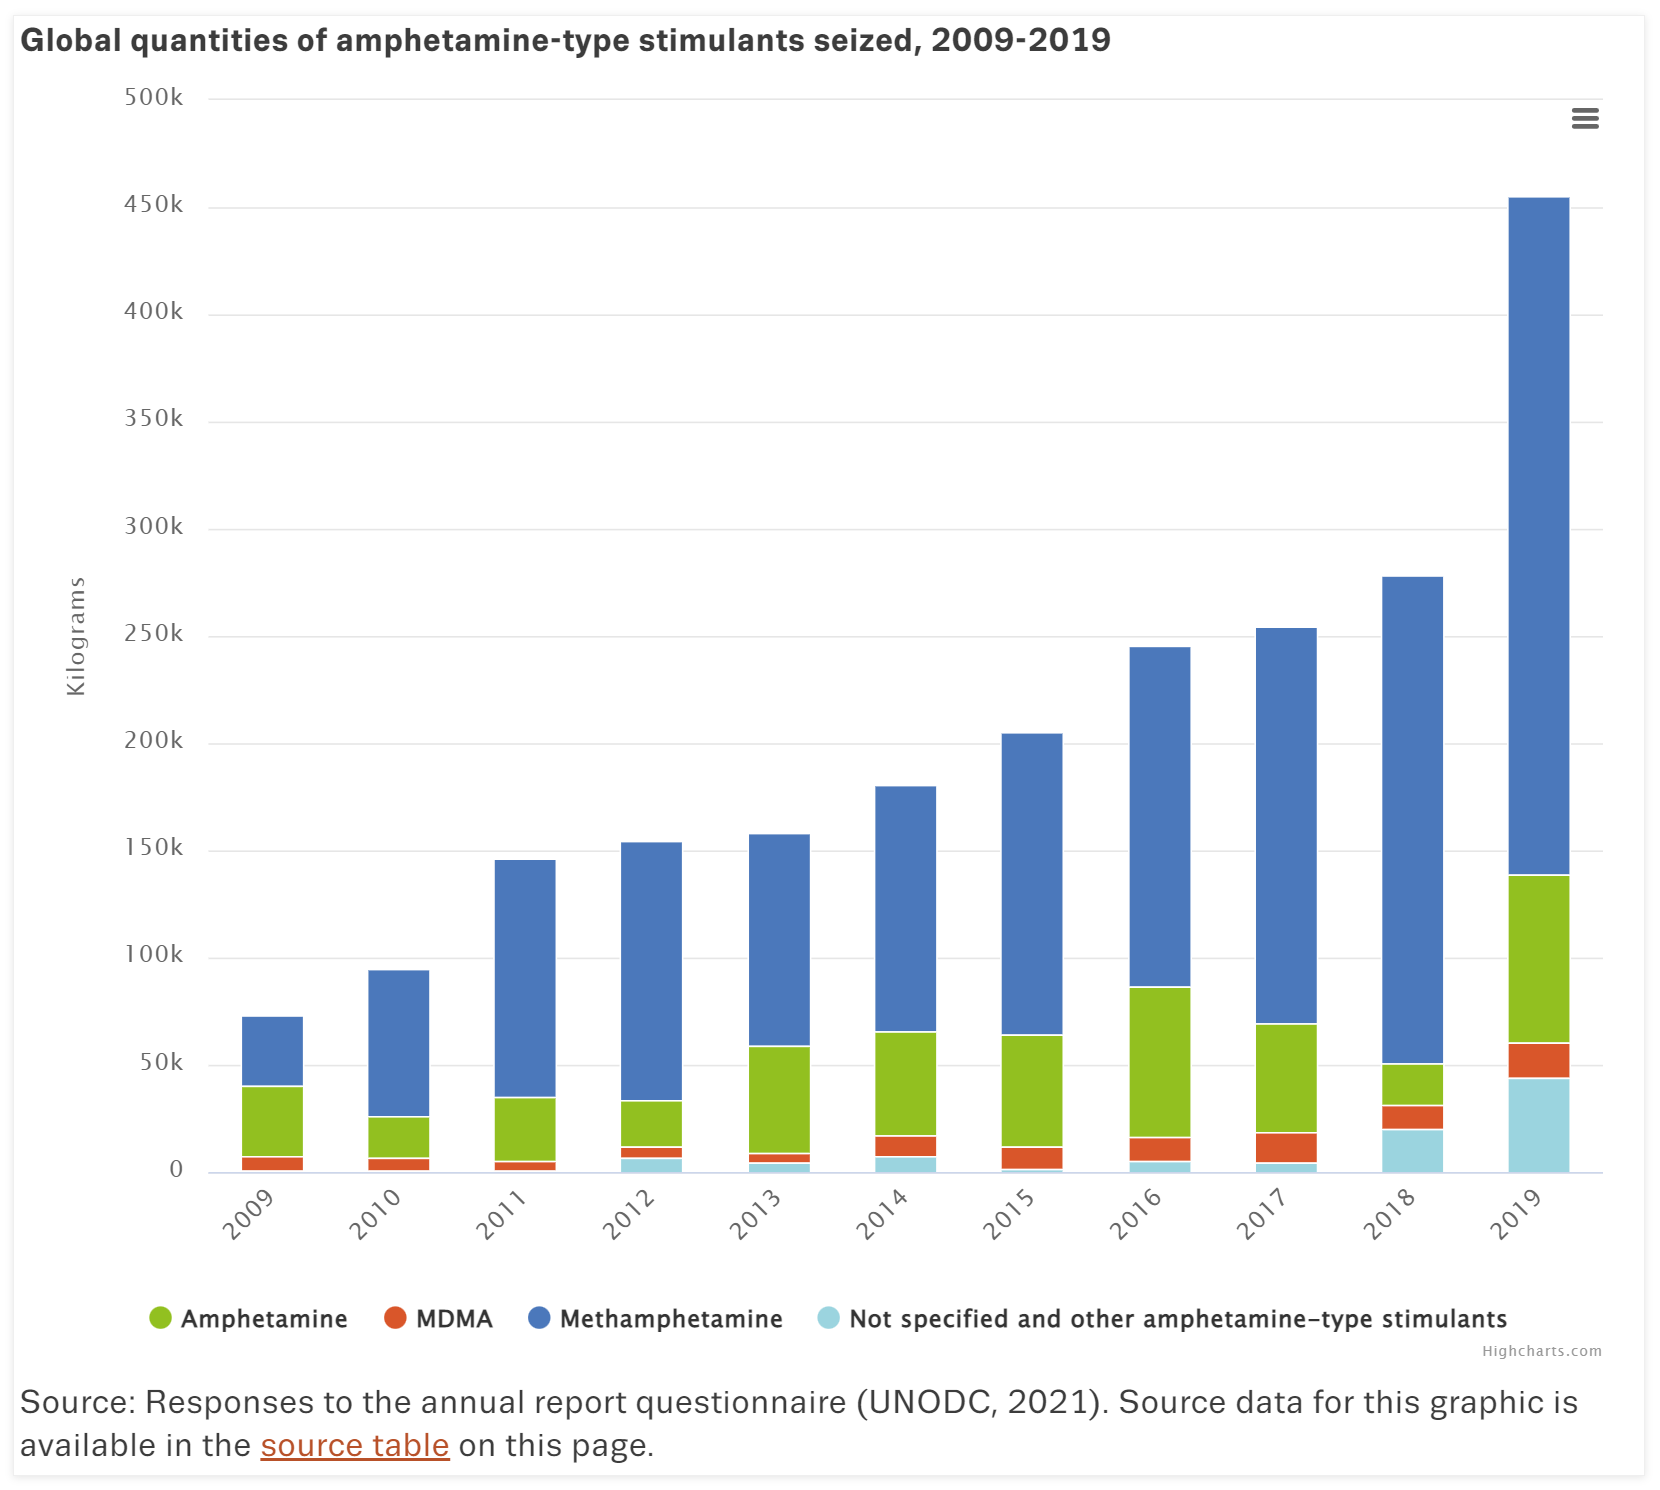 Global quantities of amphetamine-type stimulants seized, 2009-2019. Data: Responses to the annual report questionnaire (UNODC, 2021). Graphic: EMCDDA